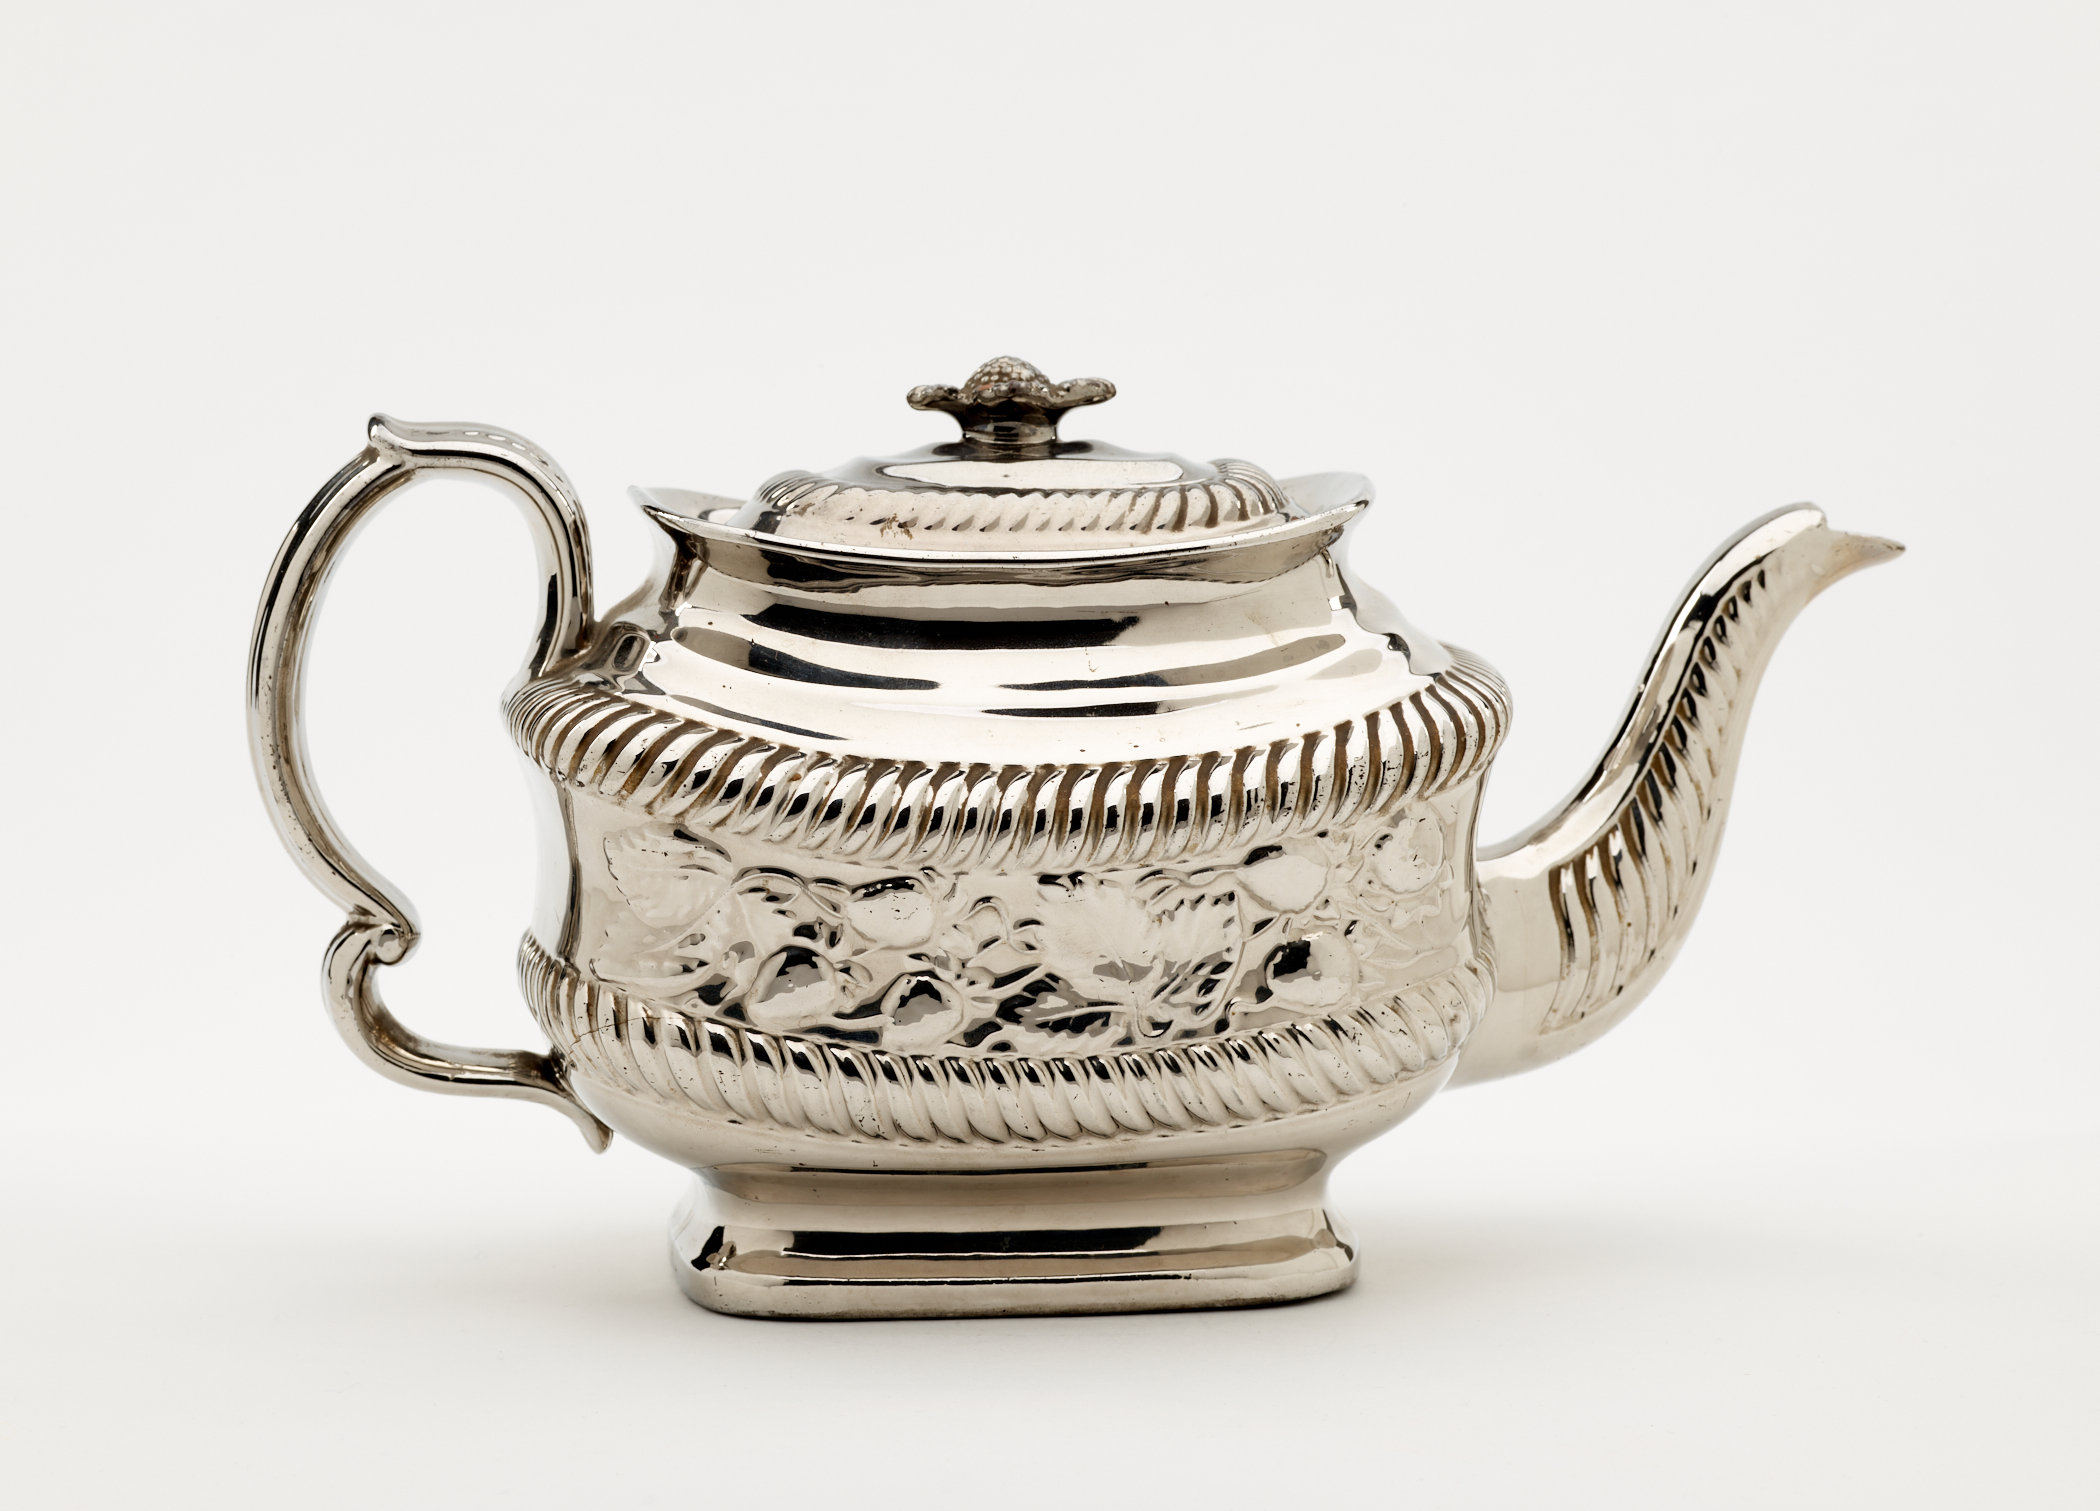 /A%20silver%20luster%20teapot%20with%20a%20decorative%20handle%2C%20a%20rounded%20square%20body%20and%20spout%20with%20sculptural%20decorations.